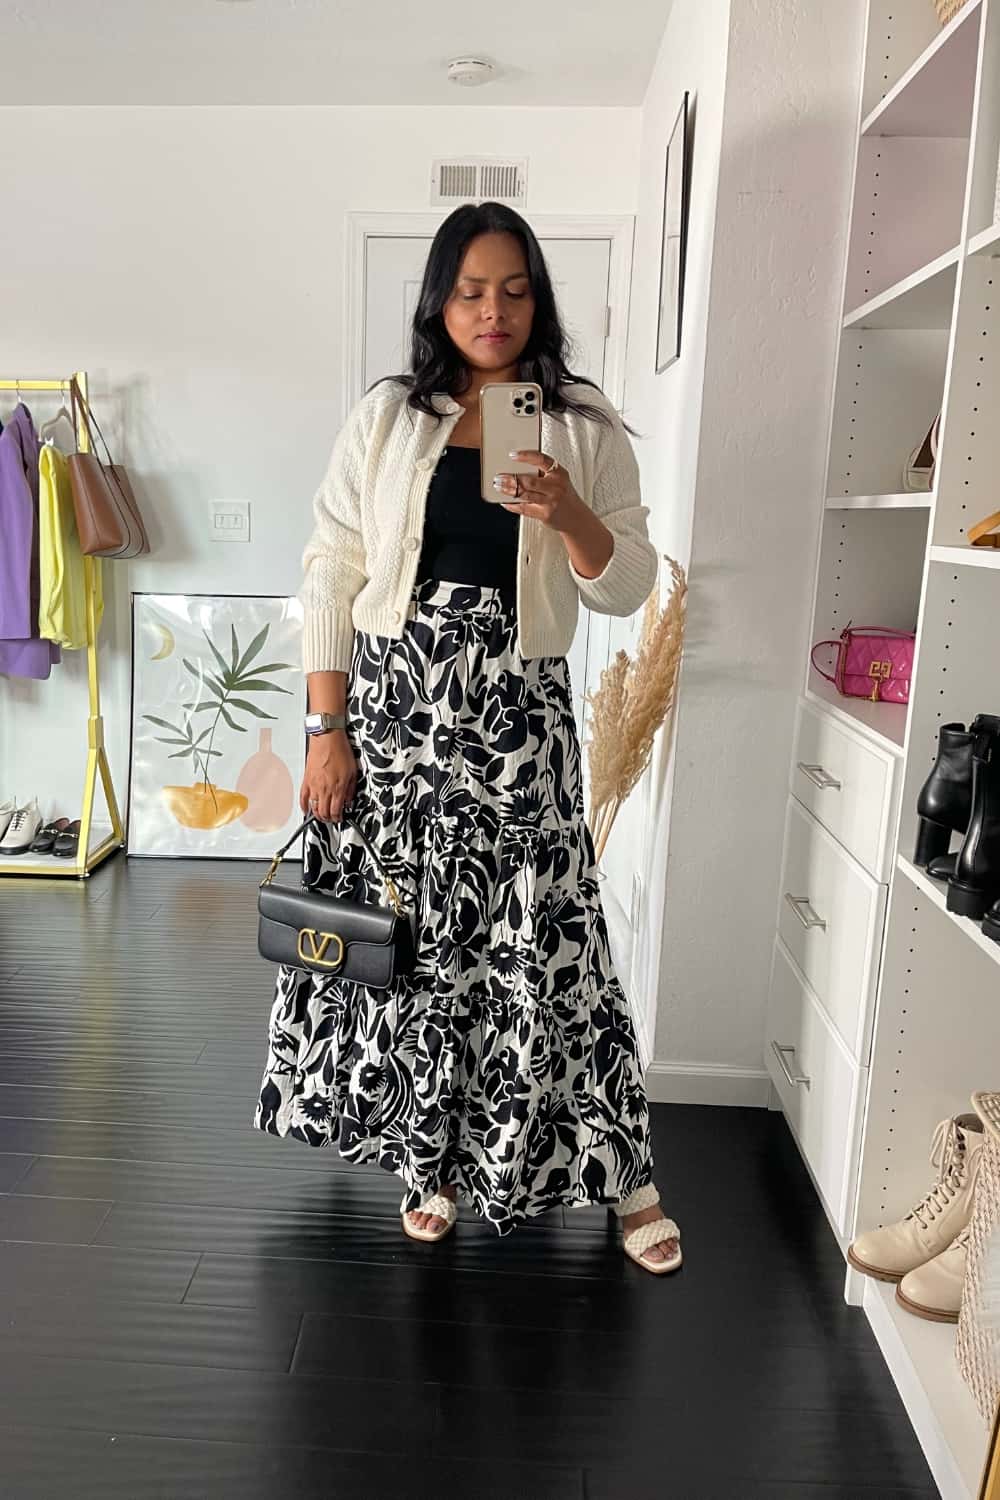 Casual Thanksgiving Outfit Idea - Printed tiered maxi skirt with cardigan